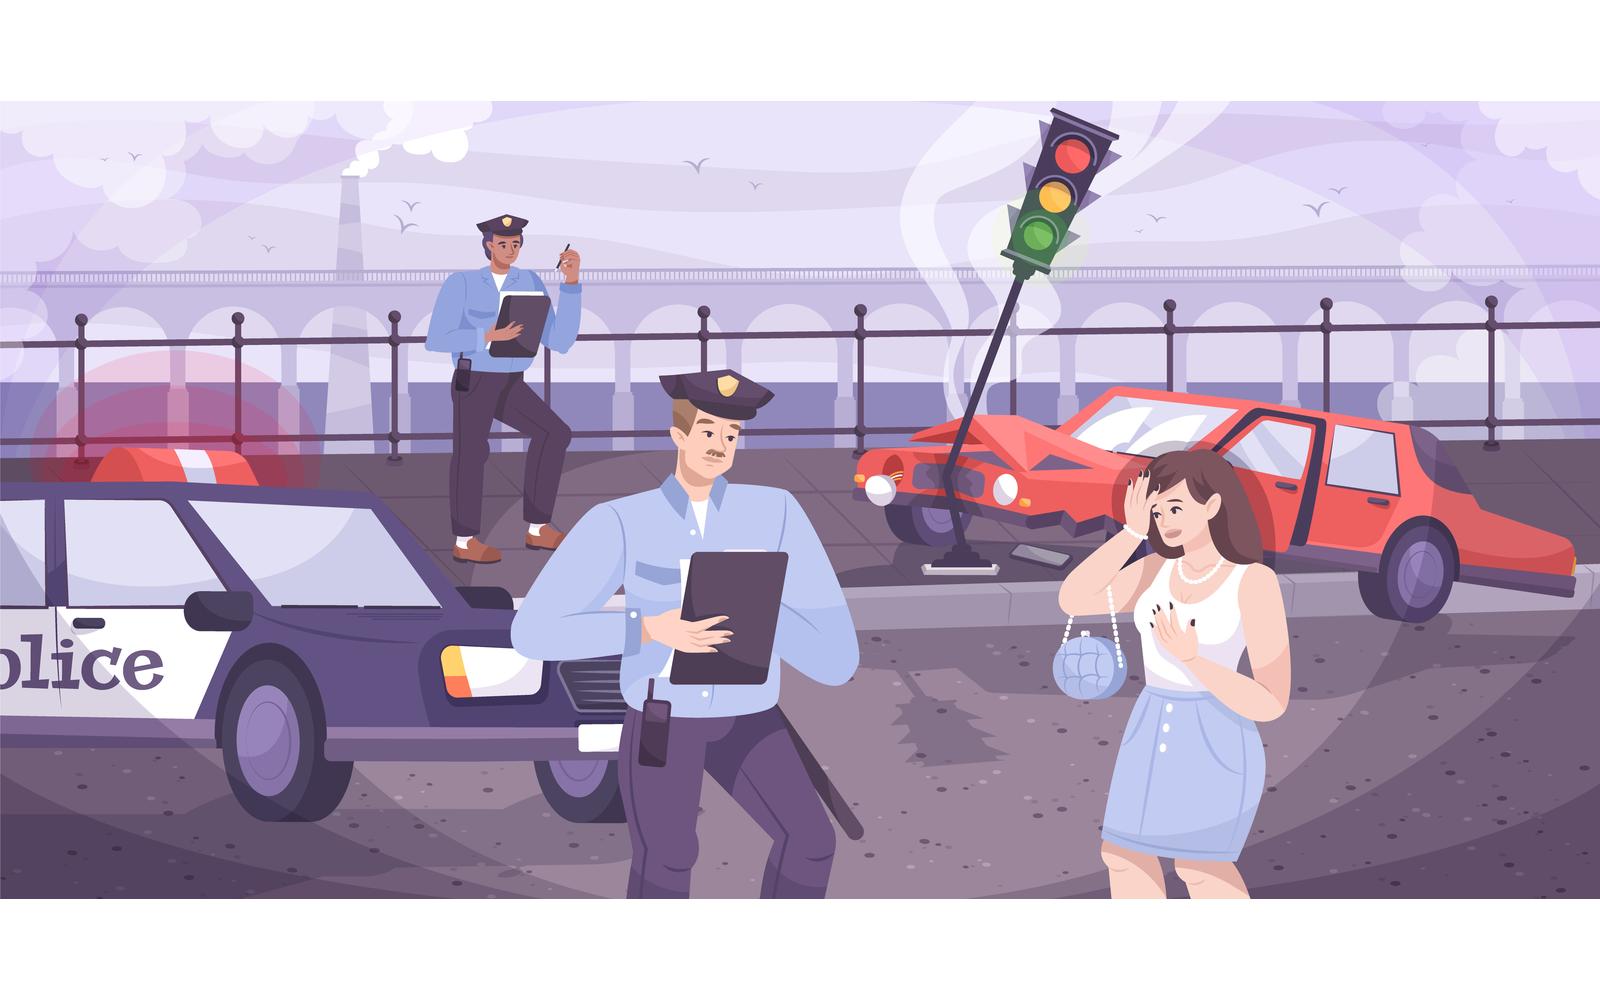 Traffic Police Road Accident Flat 201050736 Vector Illustration Concept